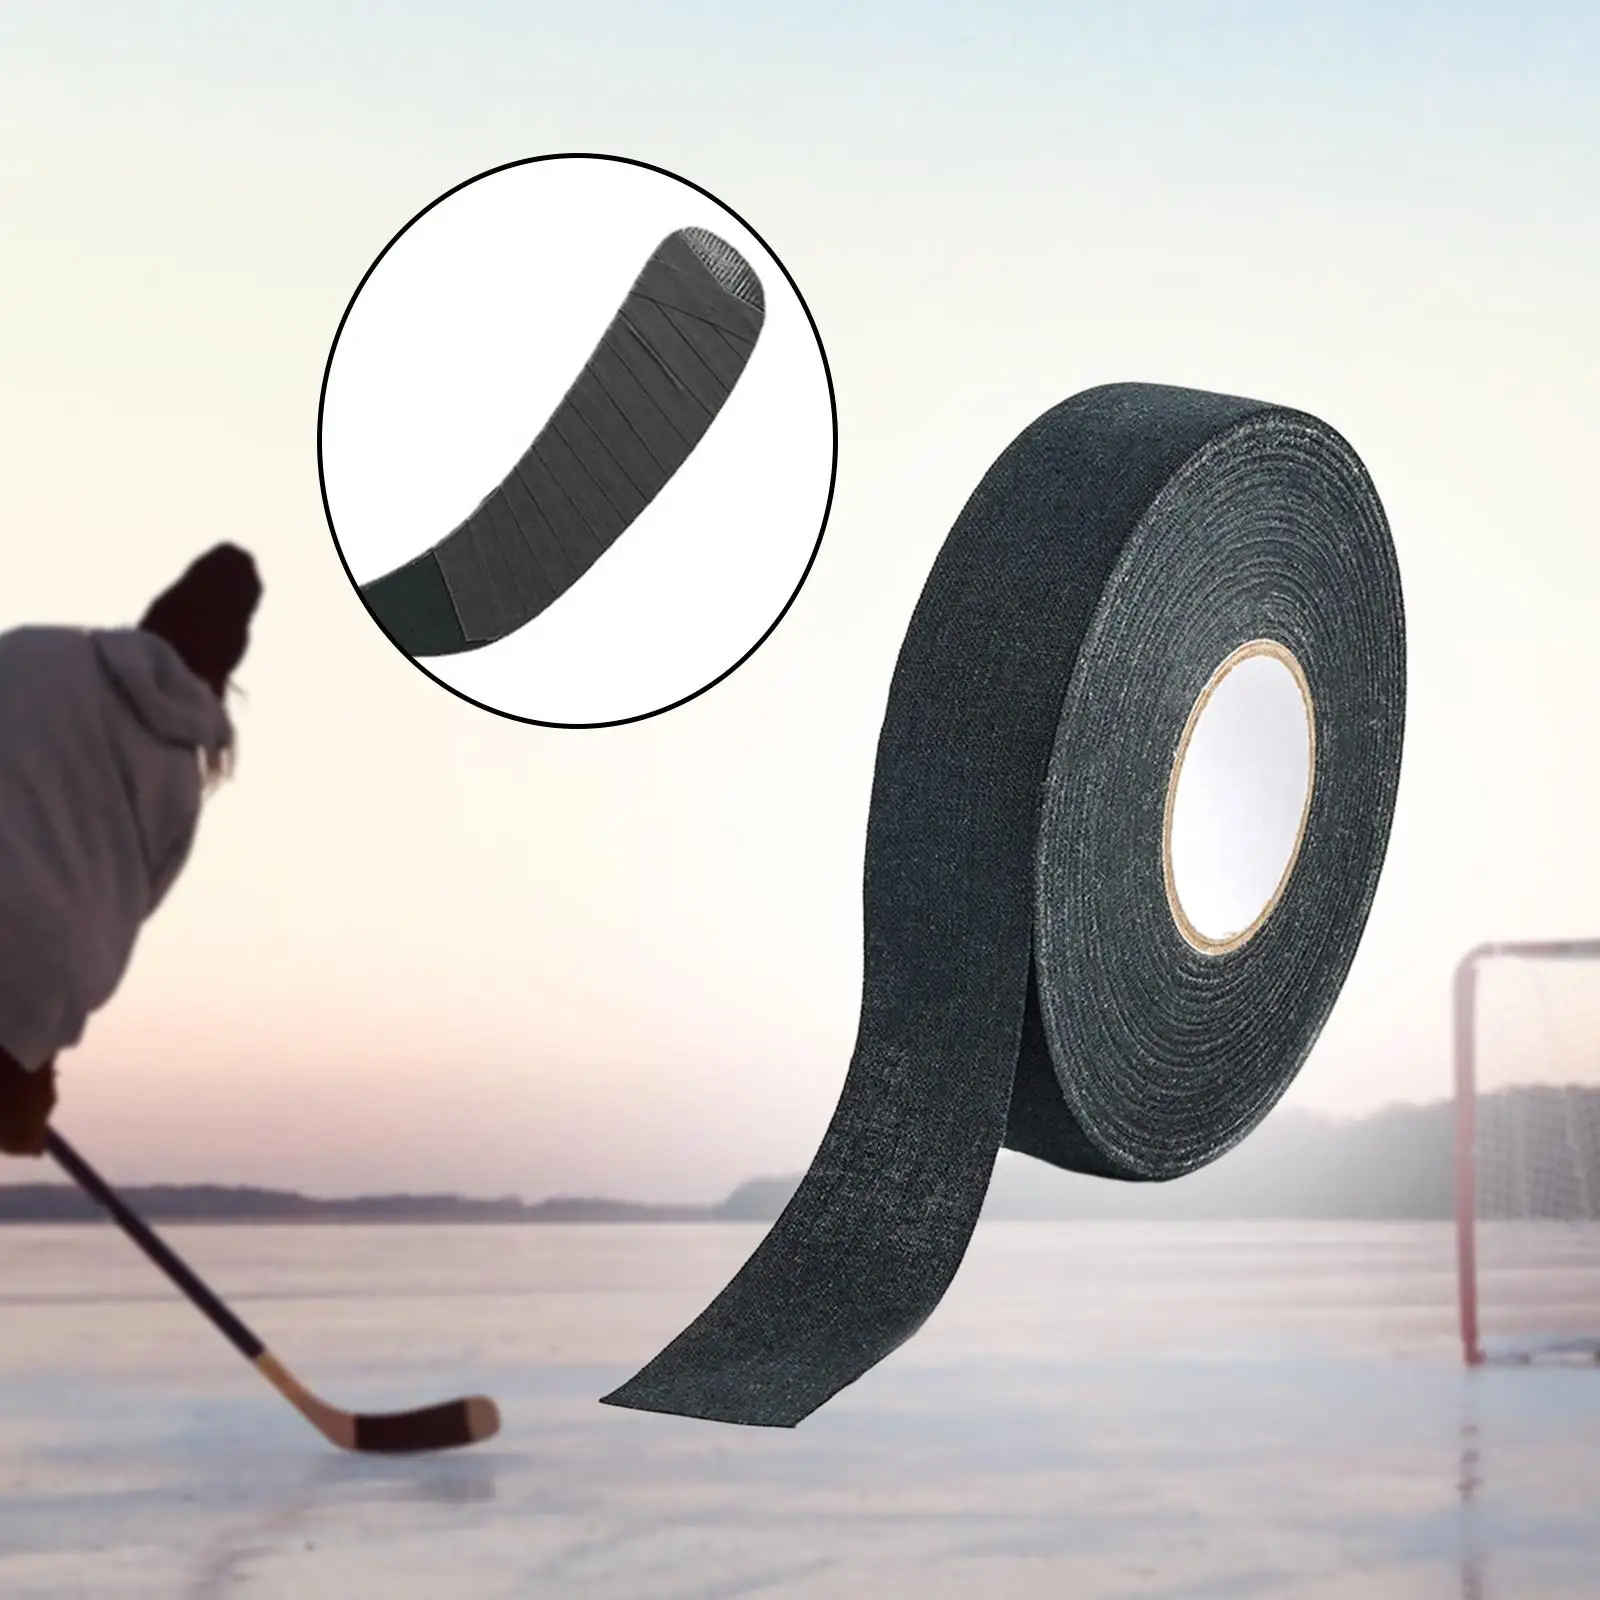 Ice Hockey Cloth Tape 2.5cmx25M Hockey Stick Tapes for Practice Training Exercise Tennis Squash Racquet Sports Badminton Grip